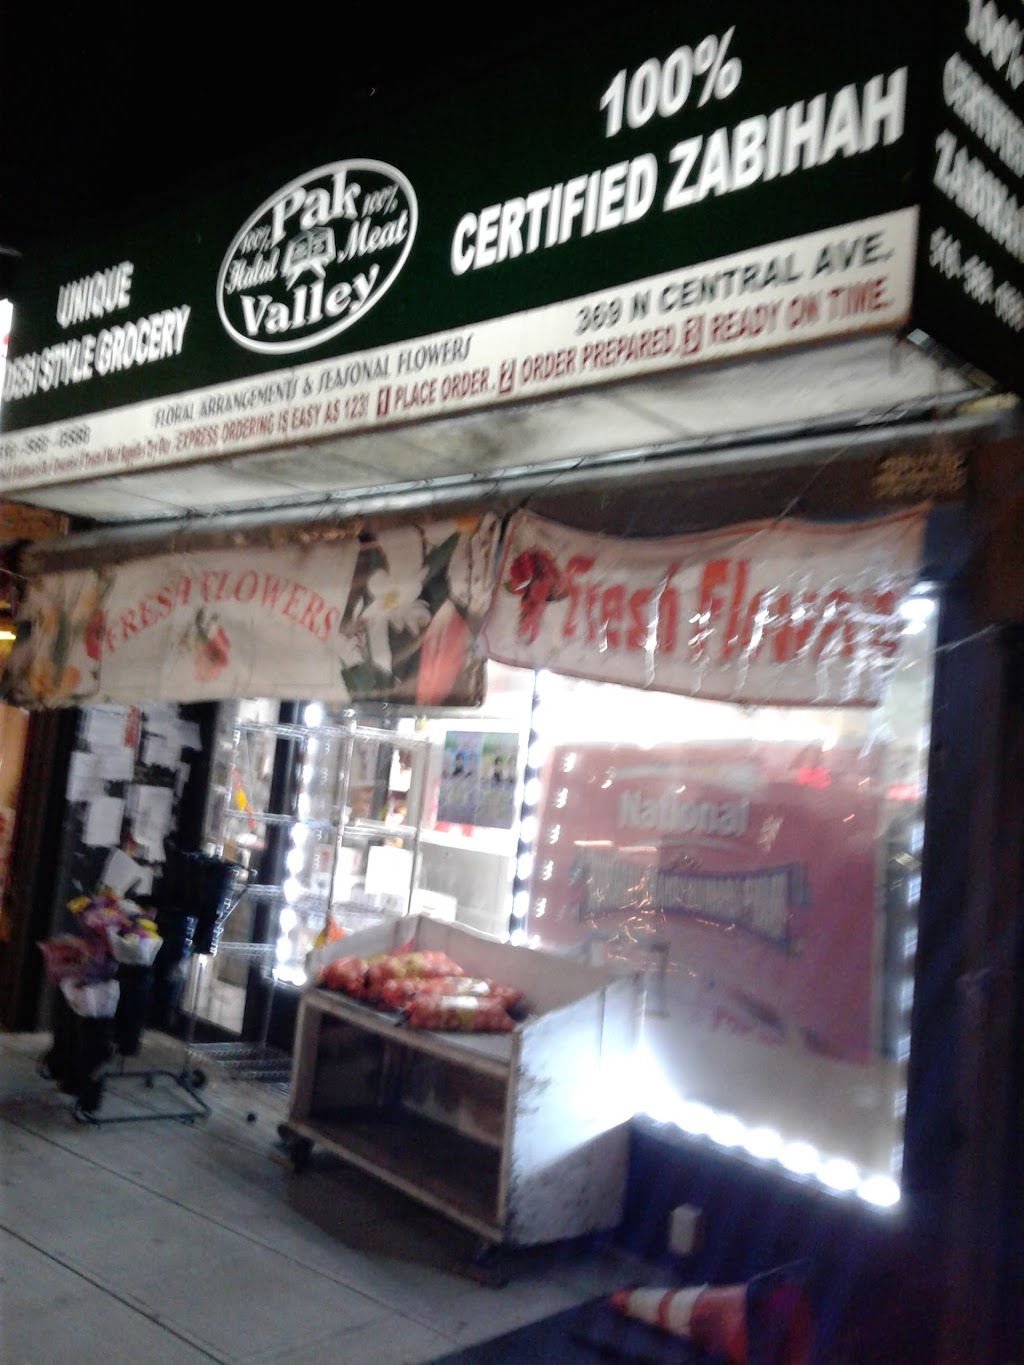 Pak Valley Halal Meats Inc | 369 N Central Ave, Valley Stream, NY 11580 | Phone: (516) 568-0588